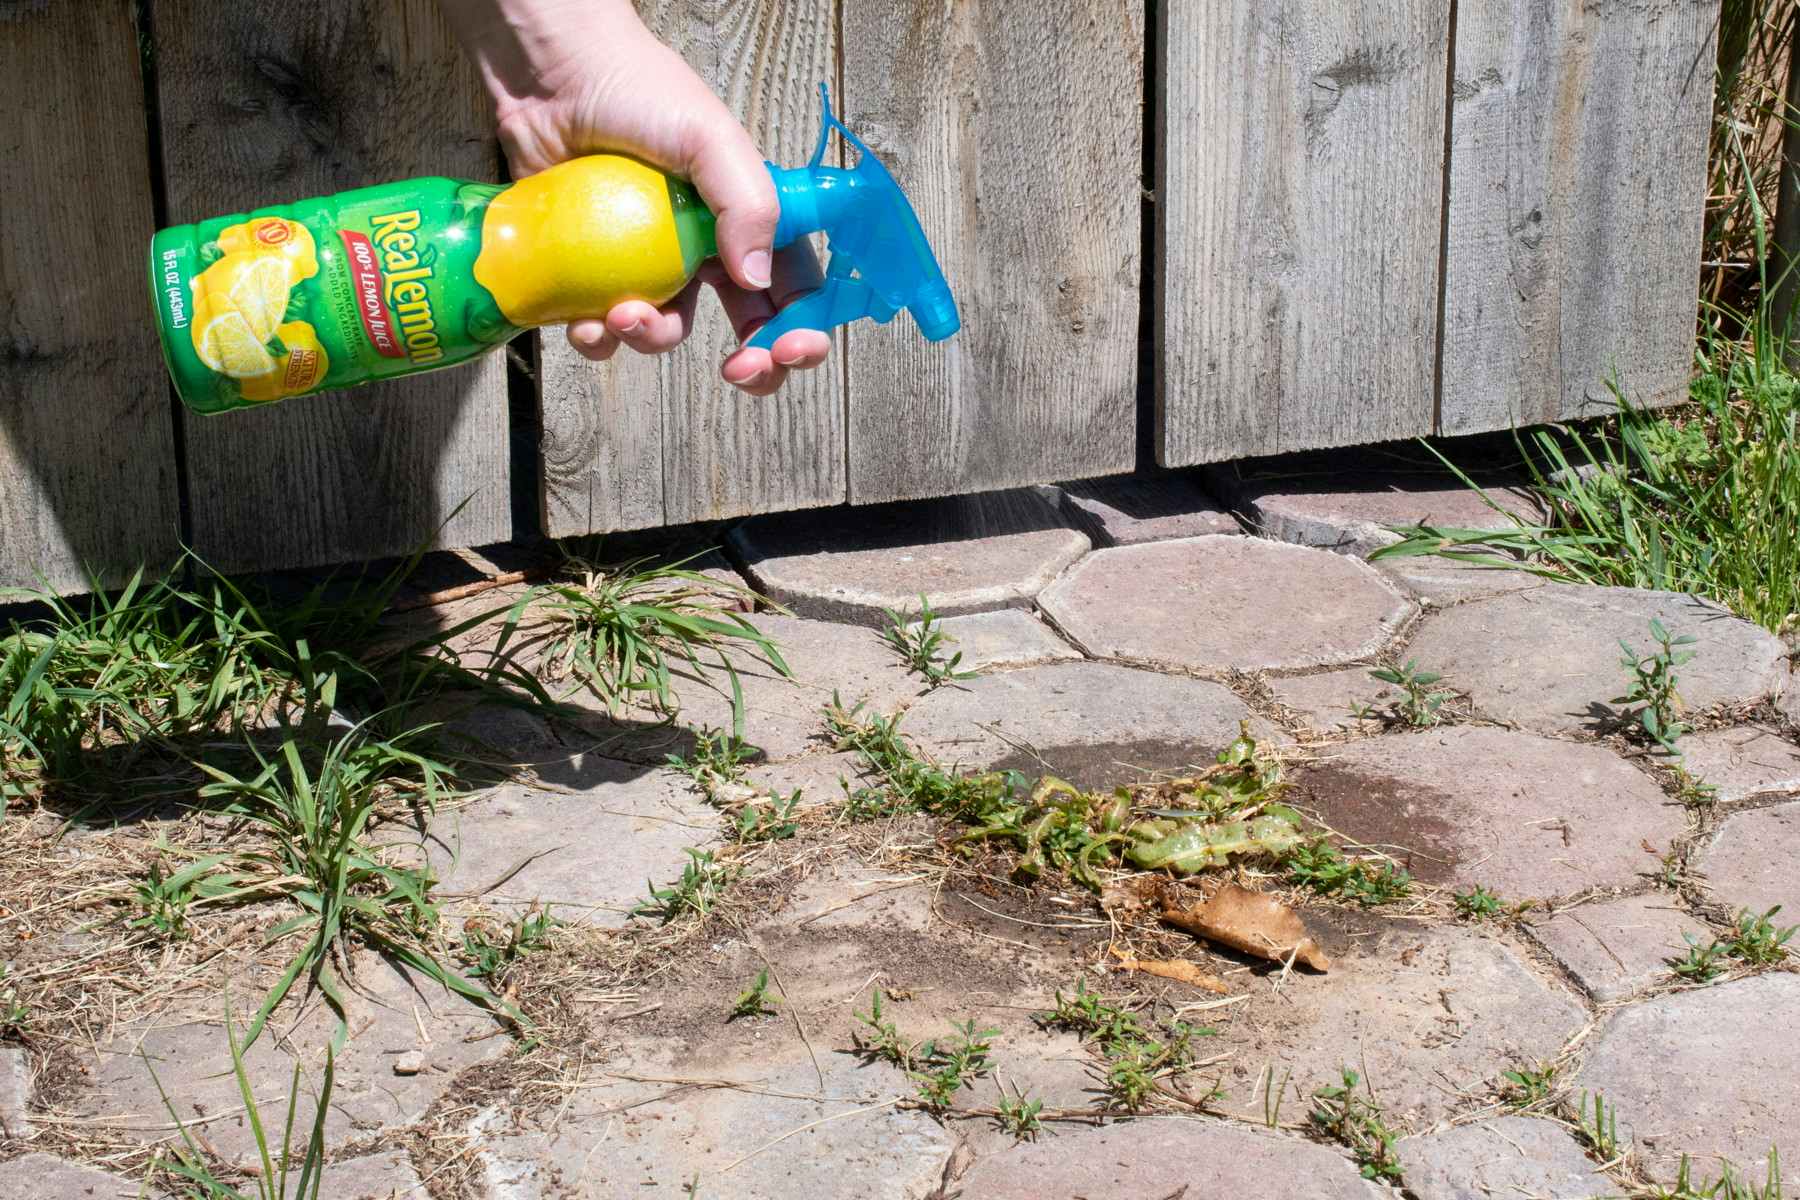 A spray nozzle attached to a bottle of lemon juice and being sprayed onto weeds growing in cracks.